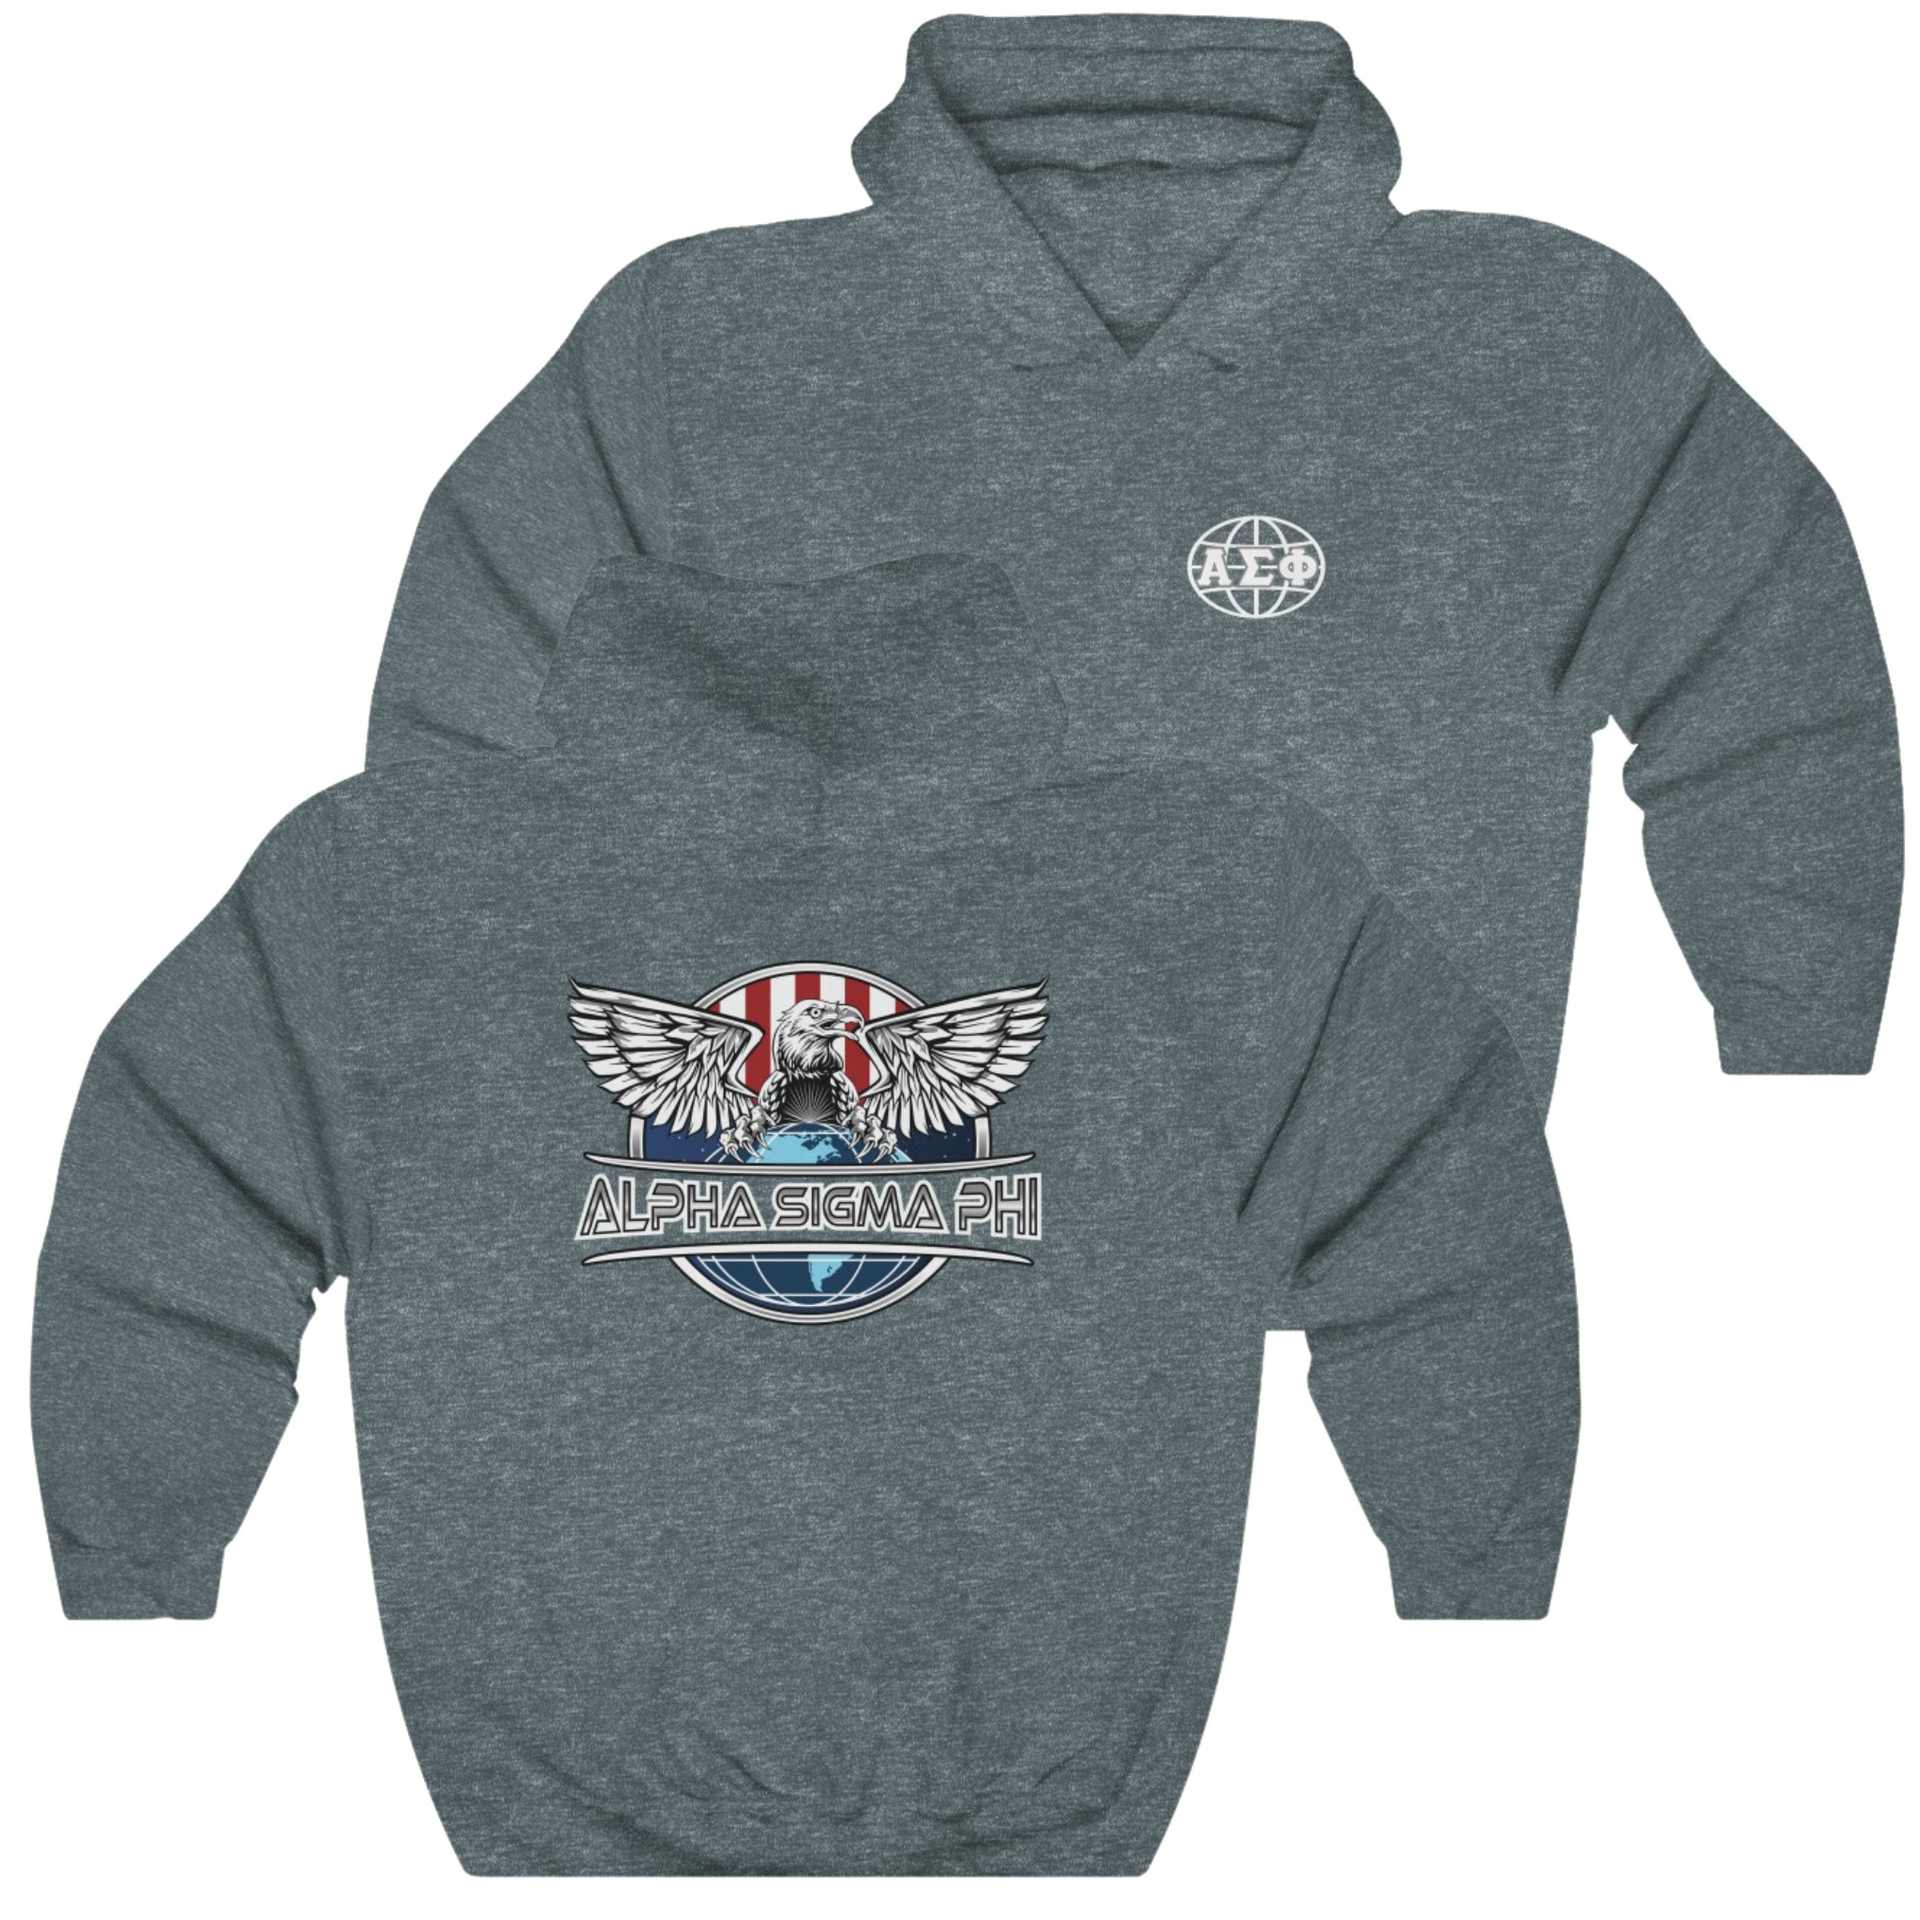 Grey Alpha Sigma Phi Graphic Hoodie | The Fraternal Order | Alpha Sigma Phi Fraternity Clothes